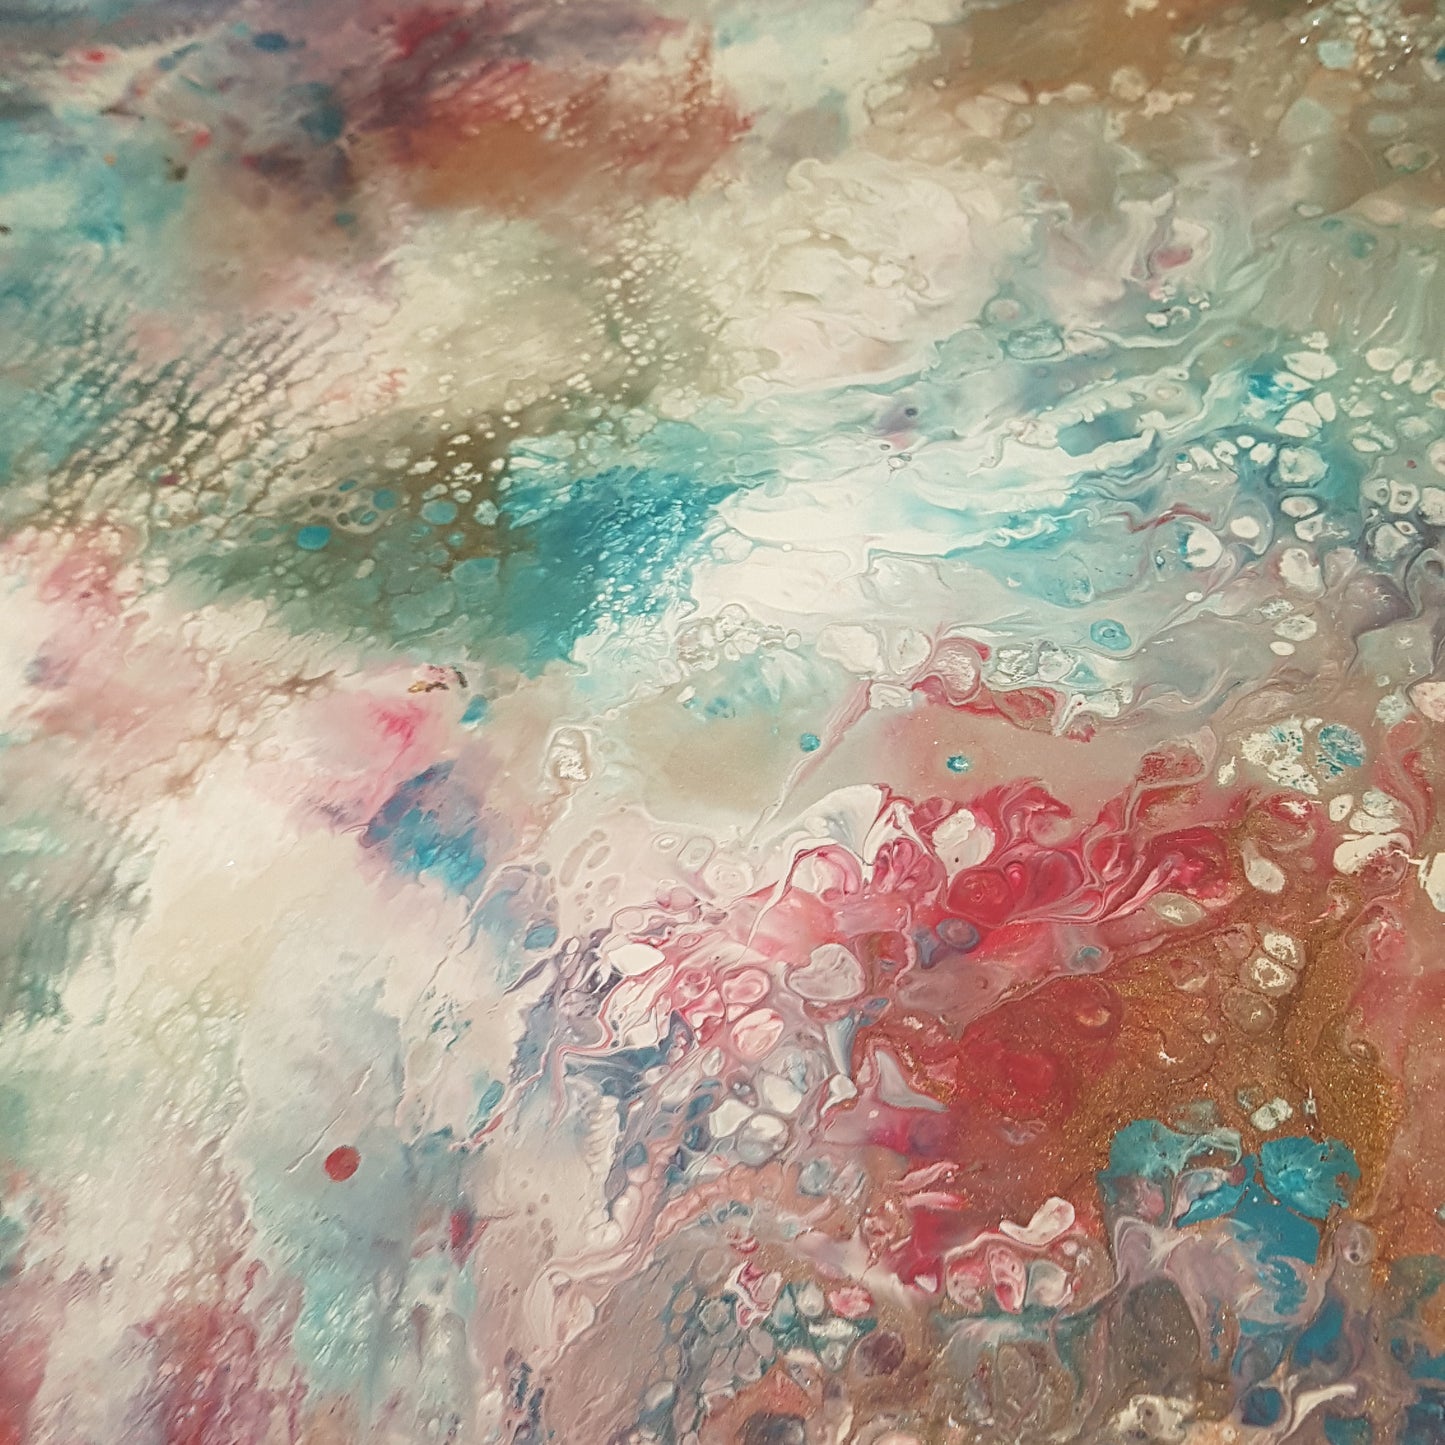 Frozen-Sky-Alexandra-Romano-Online-Art-Gallery-Buy-Unique-Abstract-Fluid-Paintings-for-Sale-Contemporary-Gold-Pink-Turquoise-Modern-Artworks-Collection